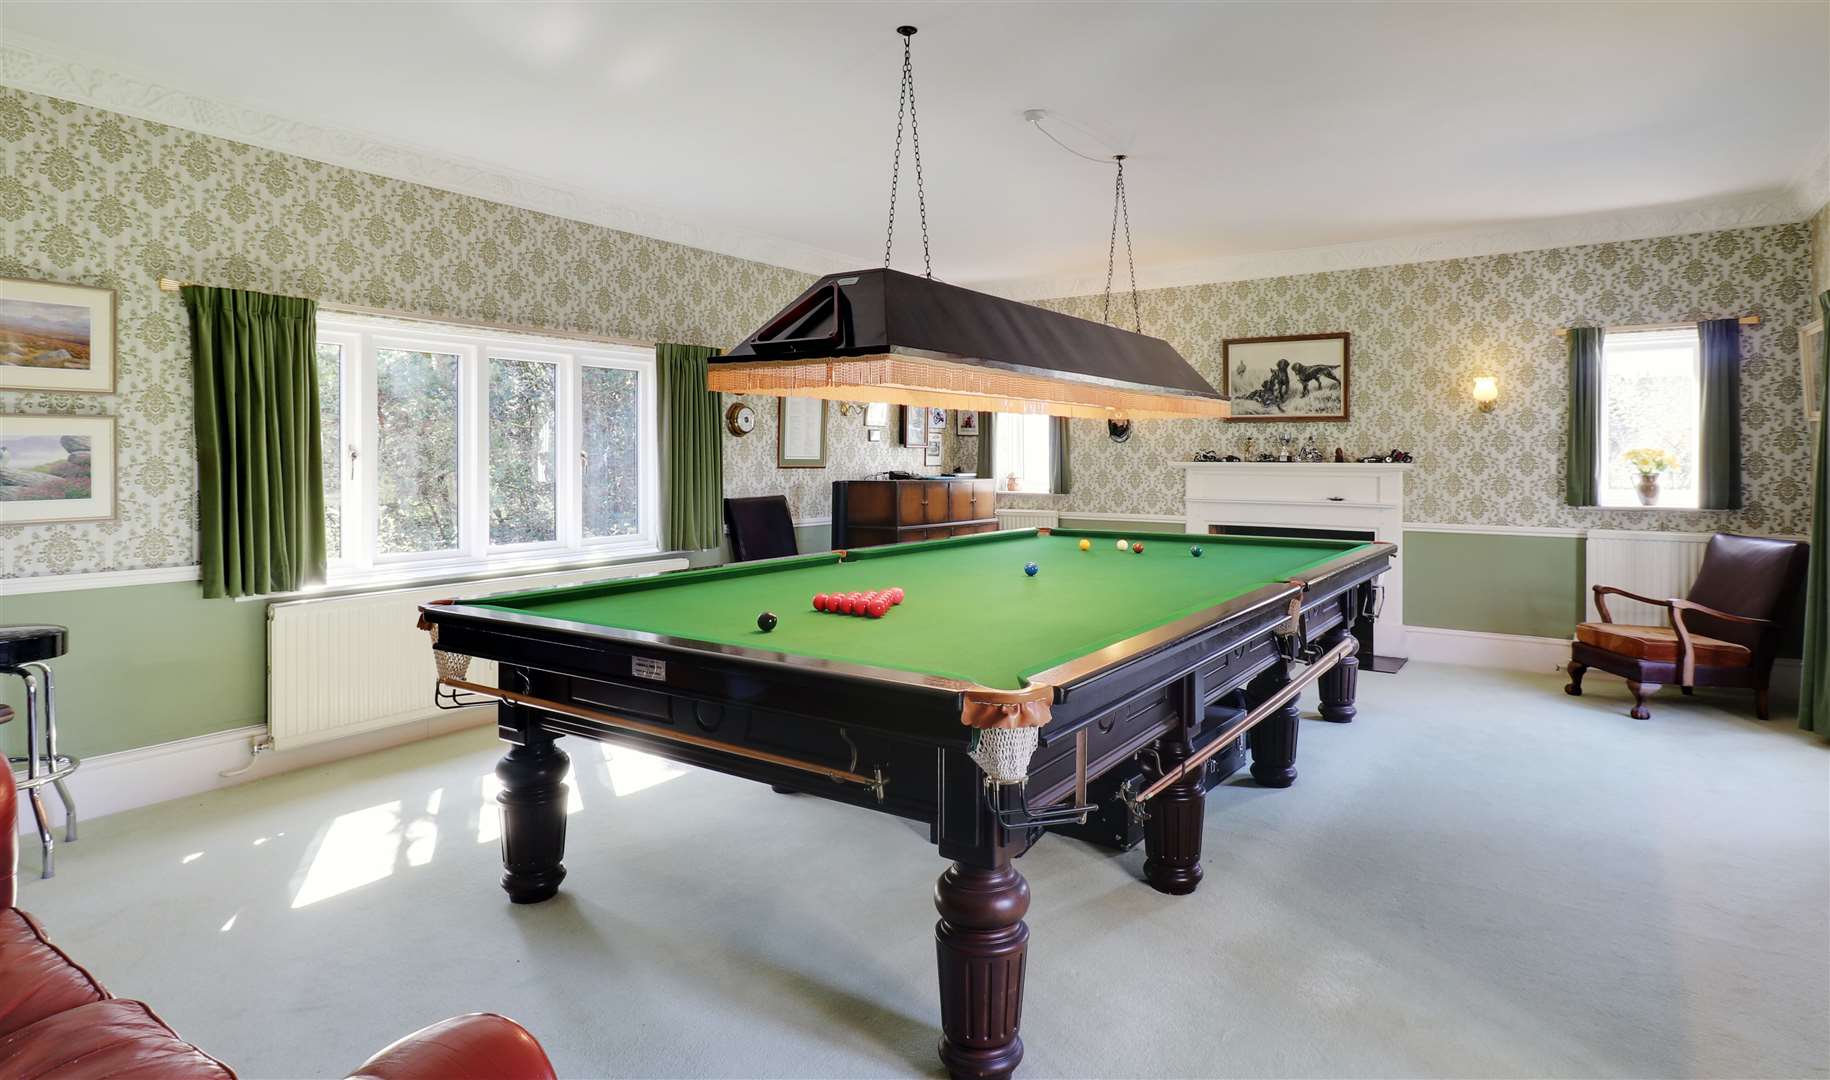 This property in Water Lane, Headcorn has a snooker room